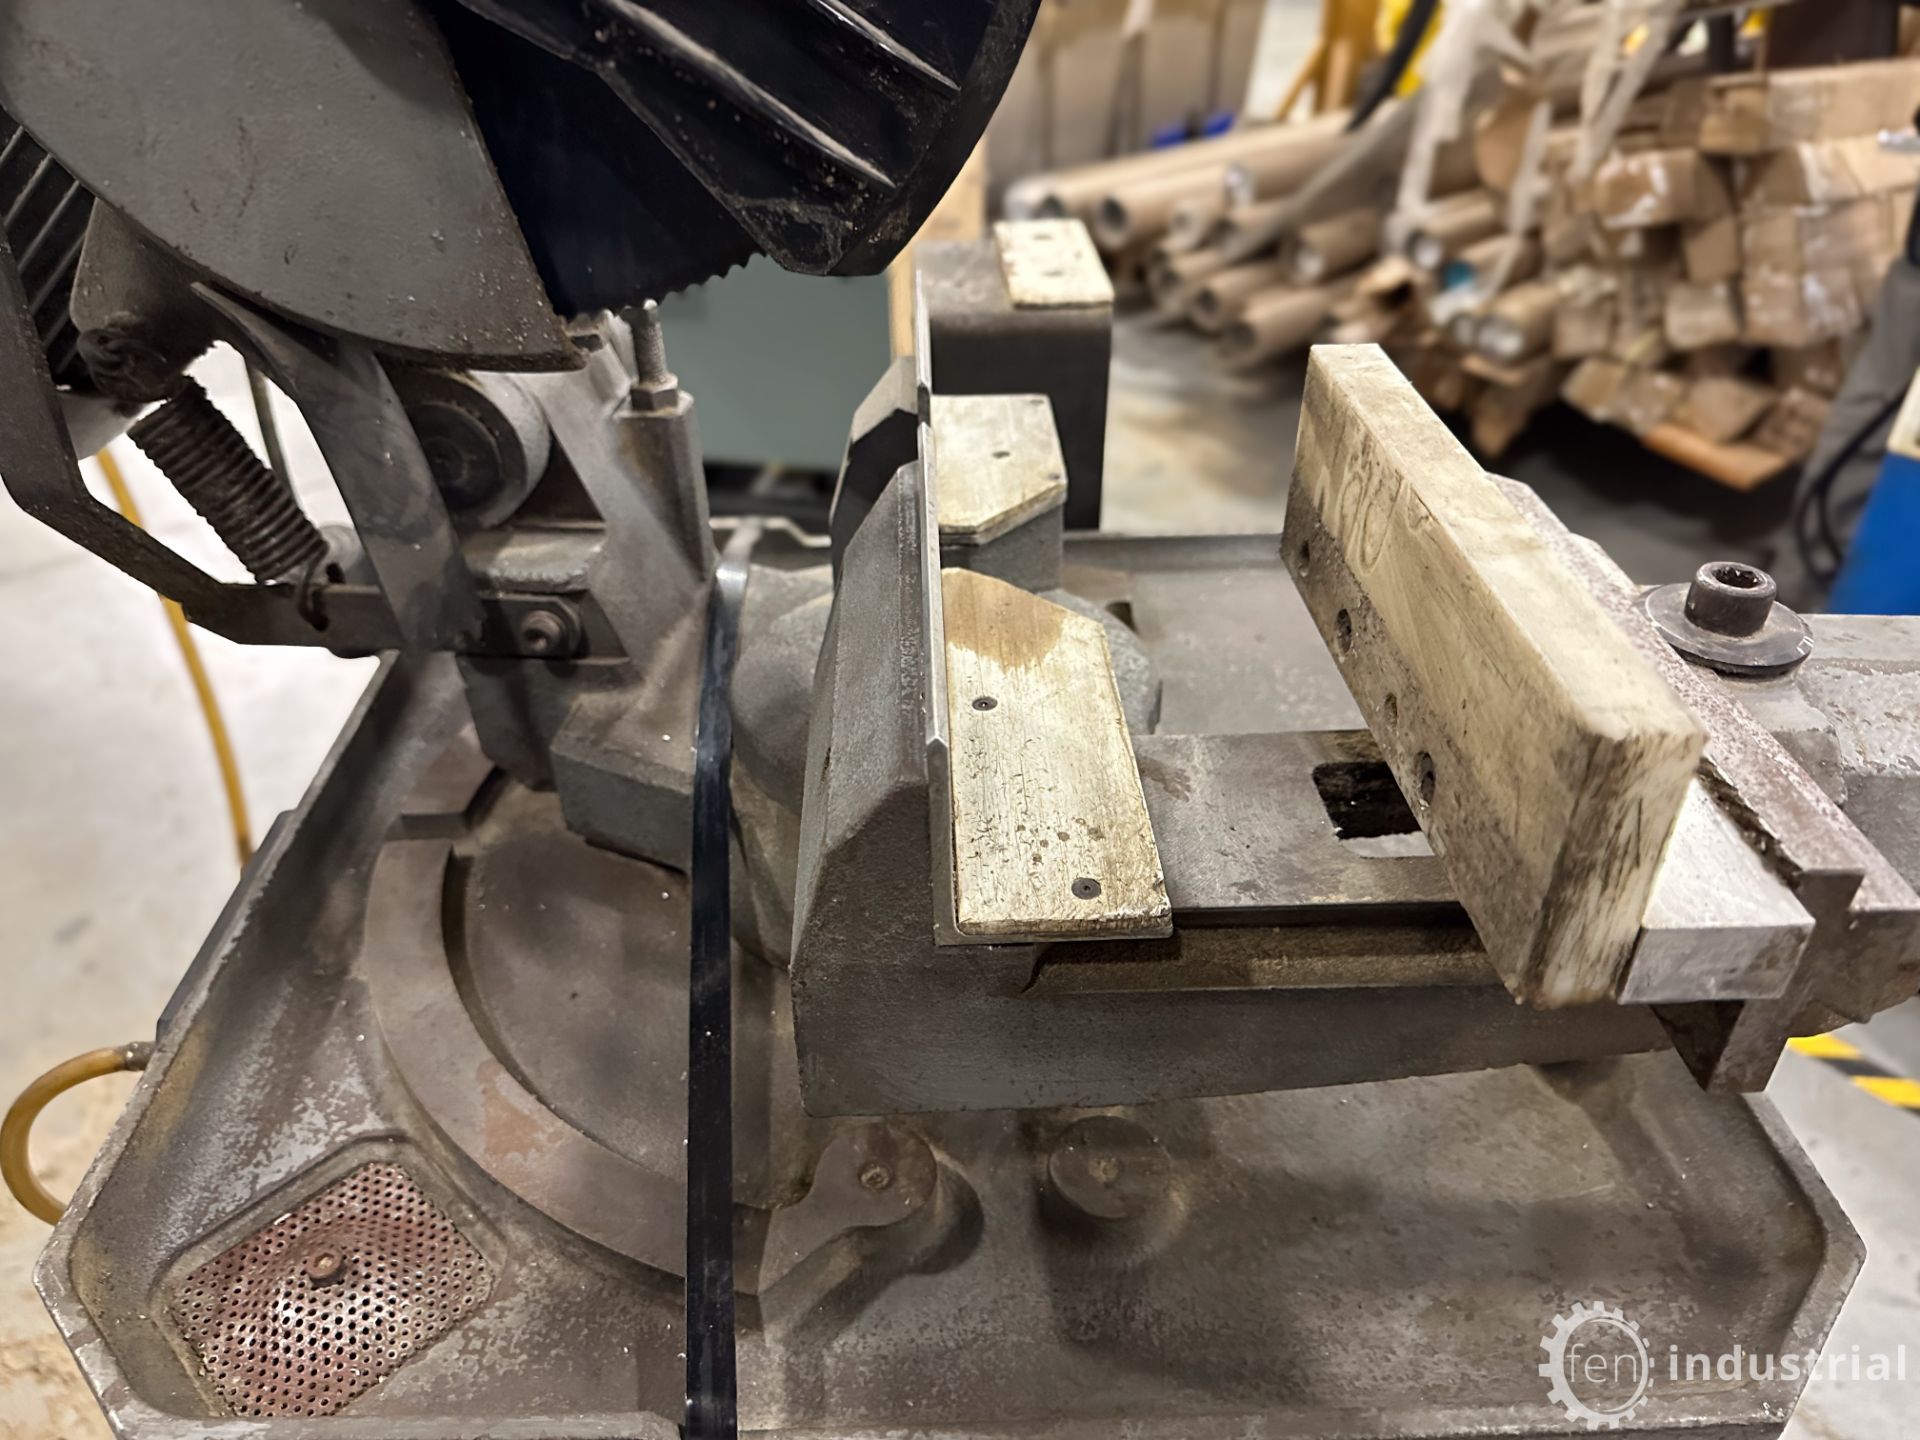 2016 STHEMMA / DAKE 315 S. CUT COLD SAW, S/N 0900744 (RIGGING FEE $100) - Image 19 of 27